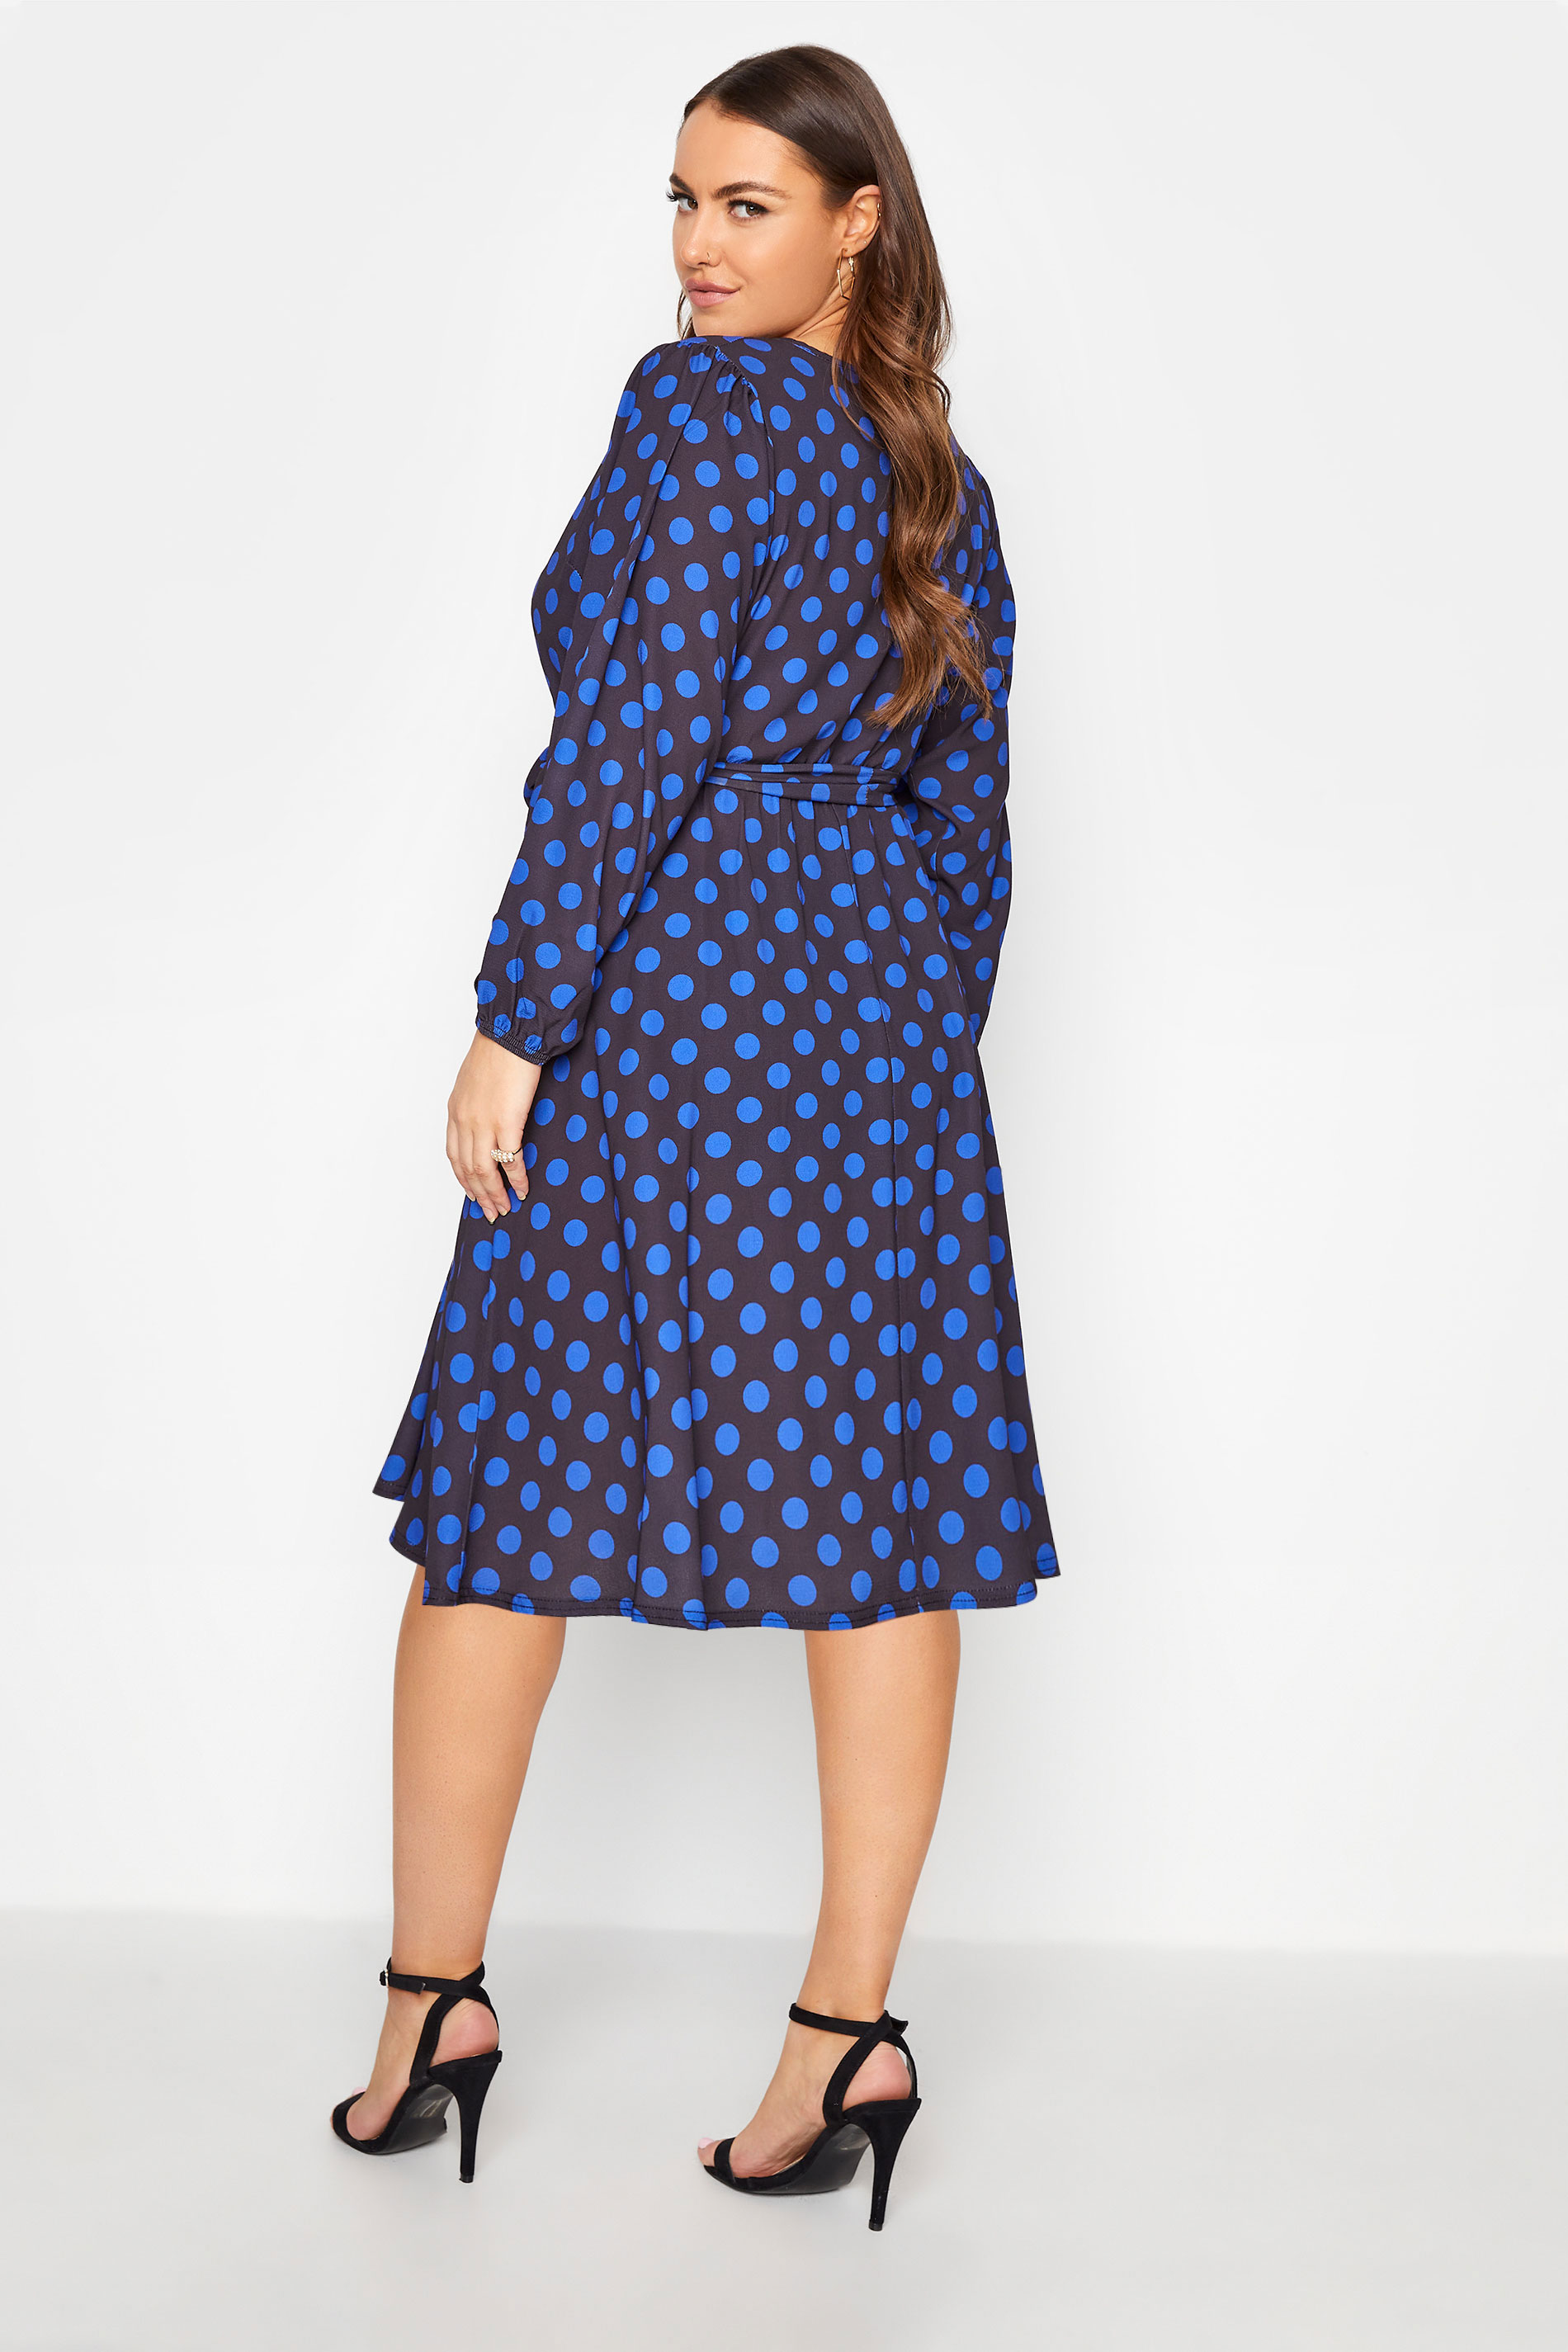 Robes Grande Taille Grande taille  Robes Portefeuilles | YOURS LONDON - Robe Bleue Marine à Pois Cache-Coeur - IR28147